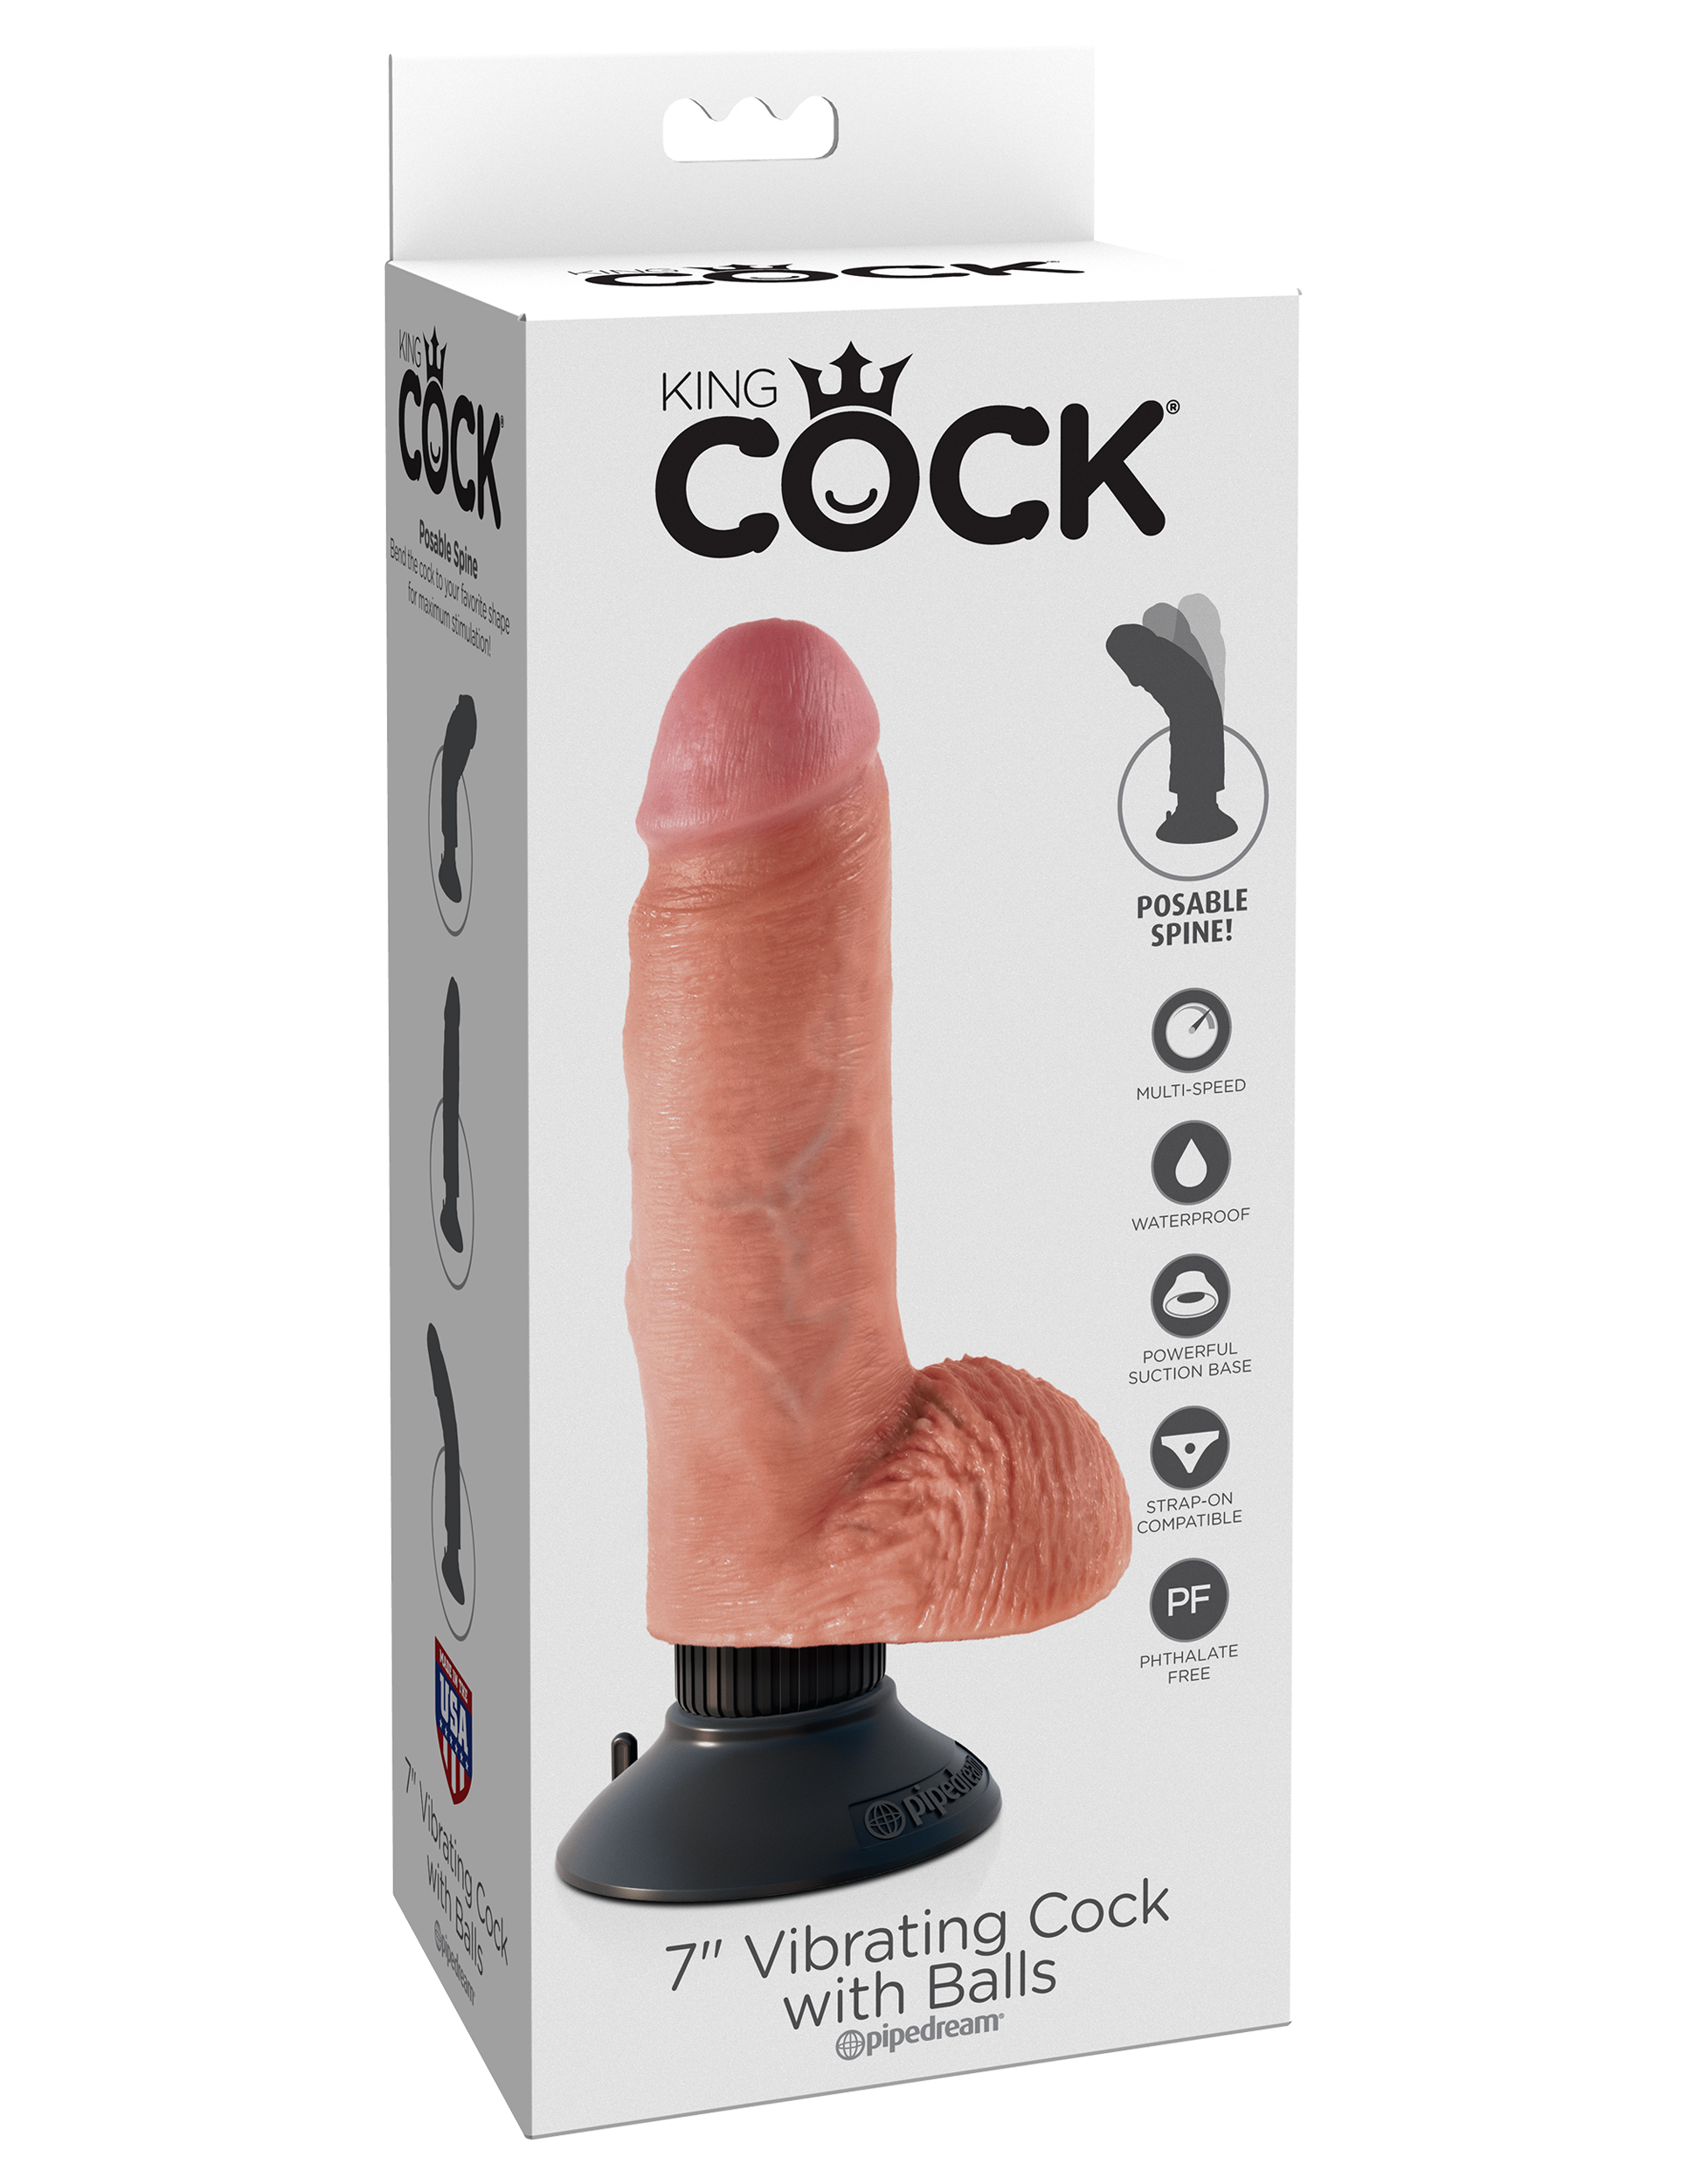  31    7 Vibrating Cock with Balls